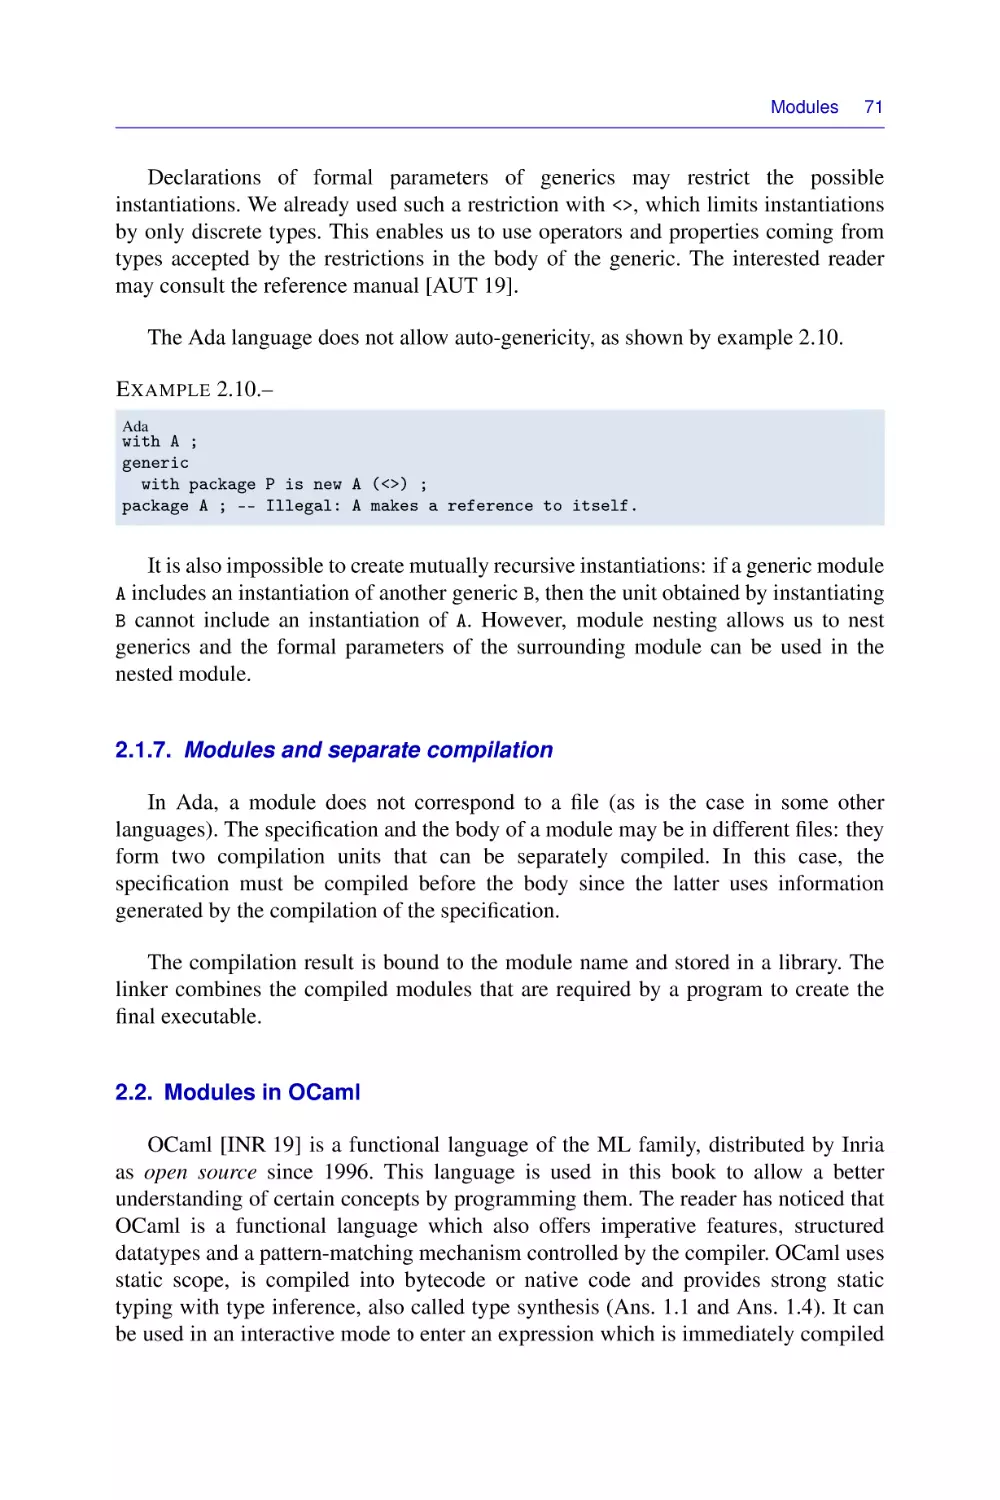 2.1.7. Modules and separate compilation
2.2. Modules in OCaml